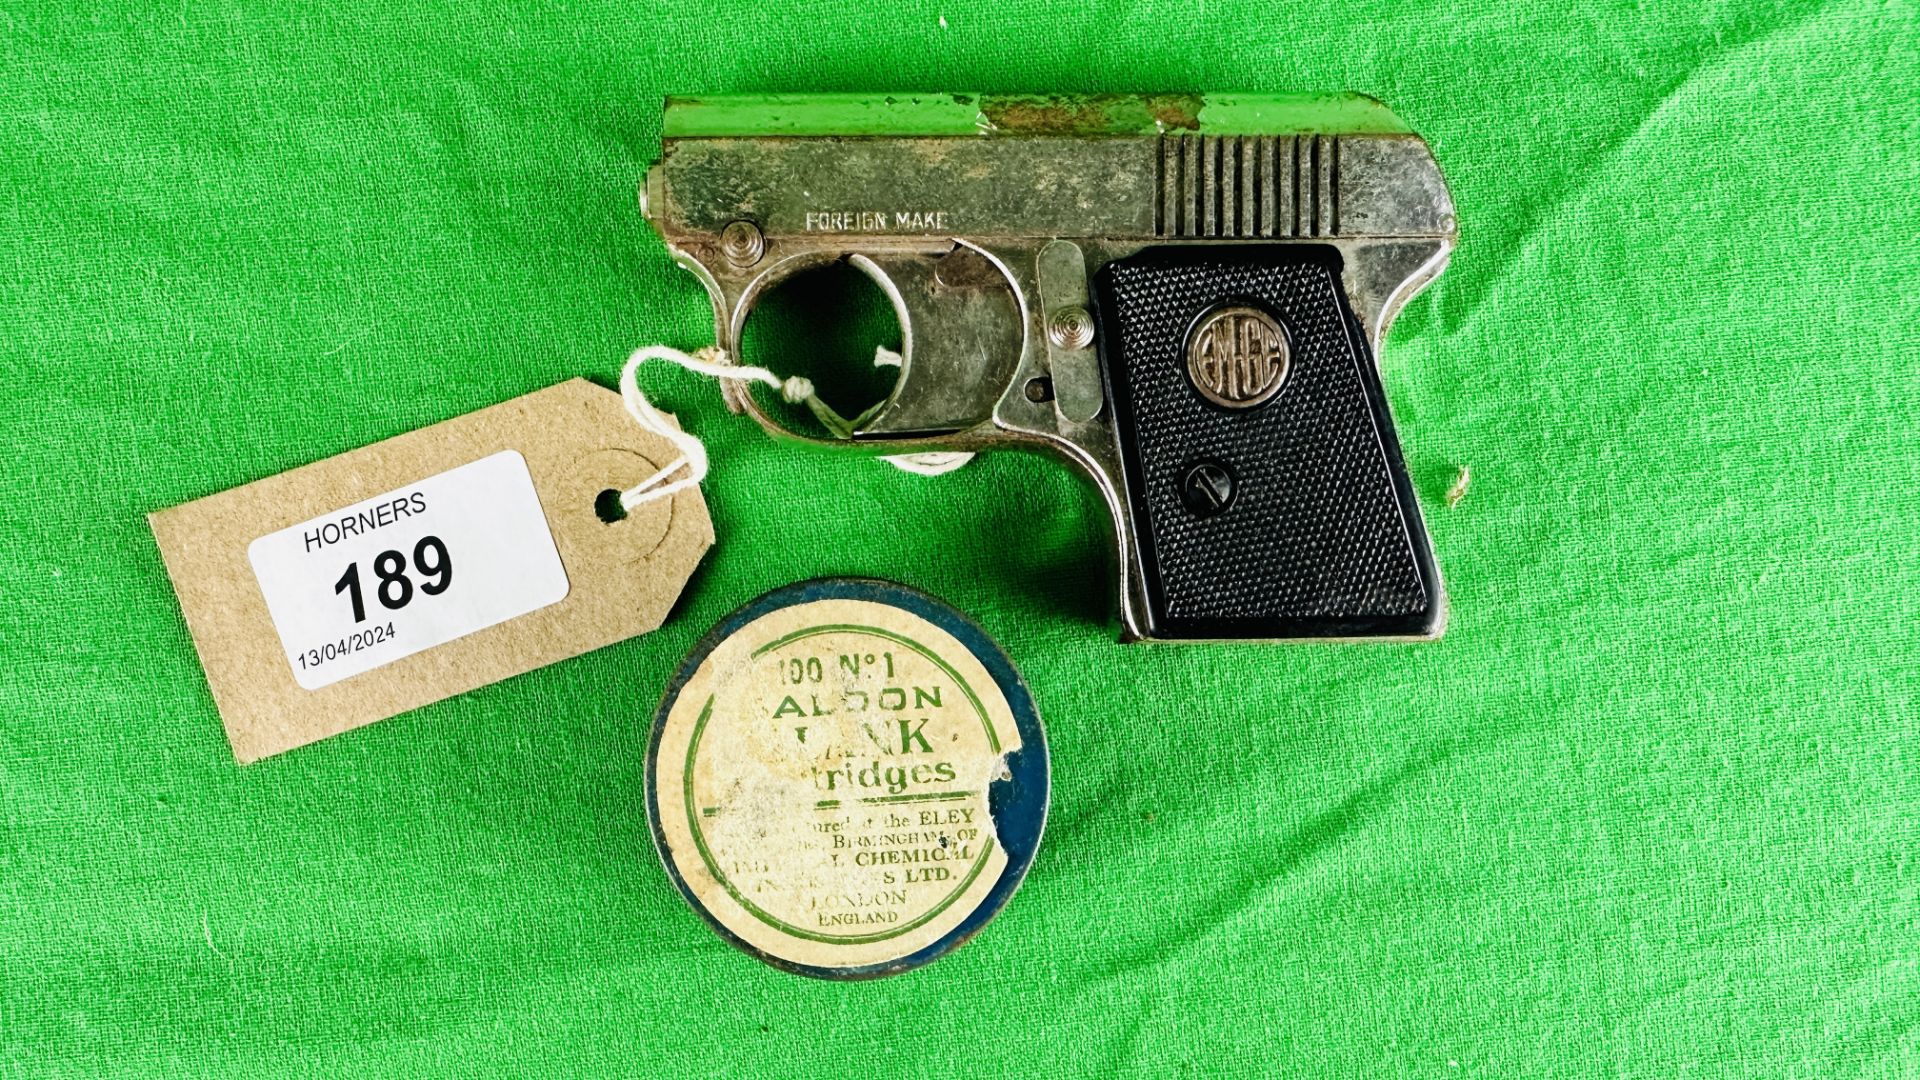 AN EMGE STARTING PISTOL COMPLETE WITH PART TUB OF BLANK CARTRIDGES - (ALL GUNS TO BE INSPECTED AND